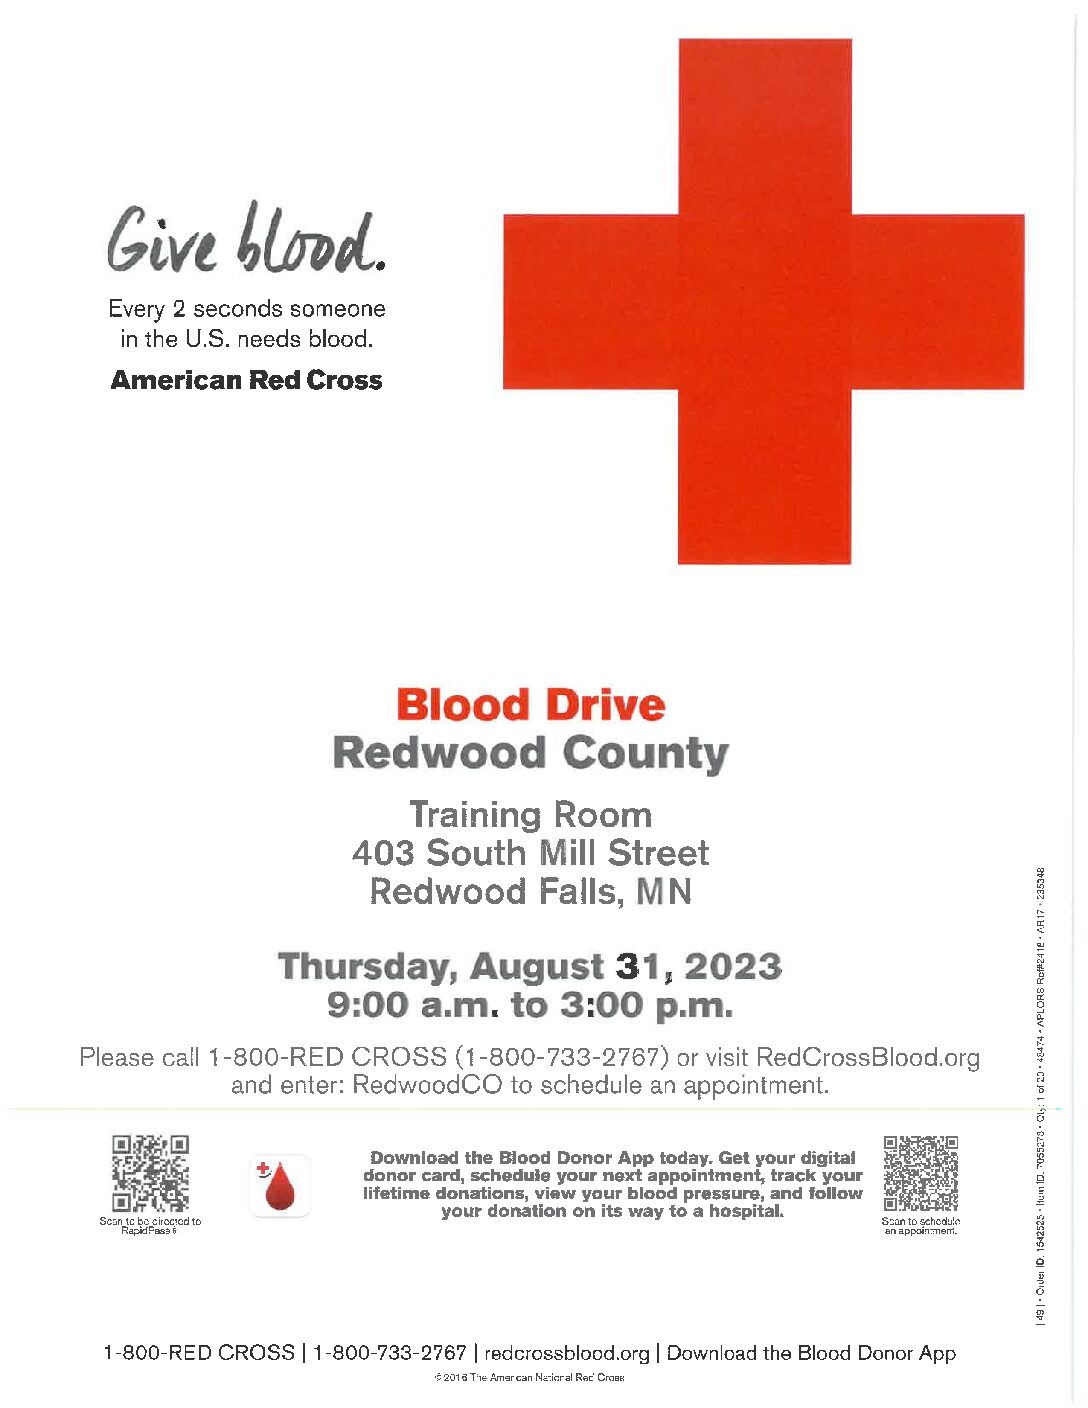 <h1 class="tribe-events-single-event-title">Redwood County Blood Drive</h1>